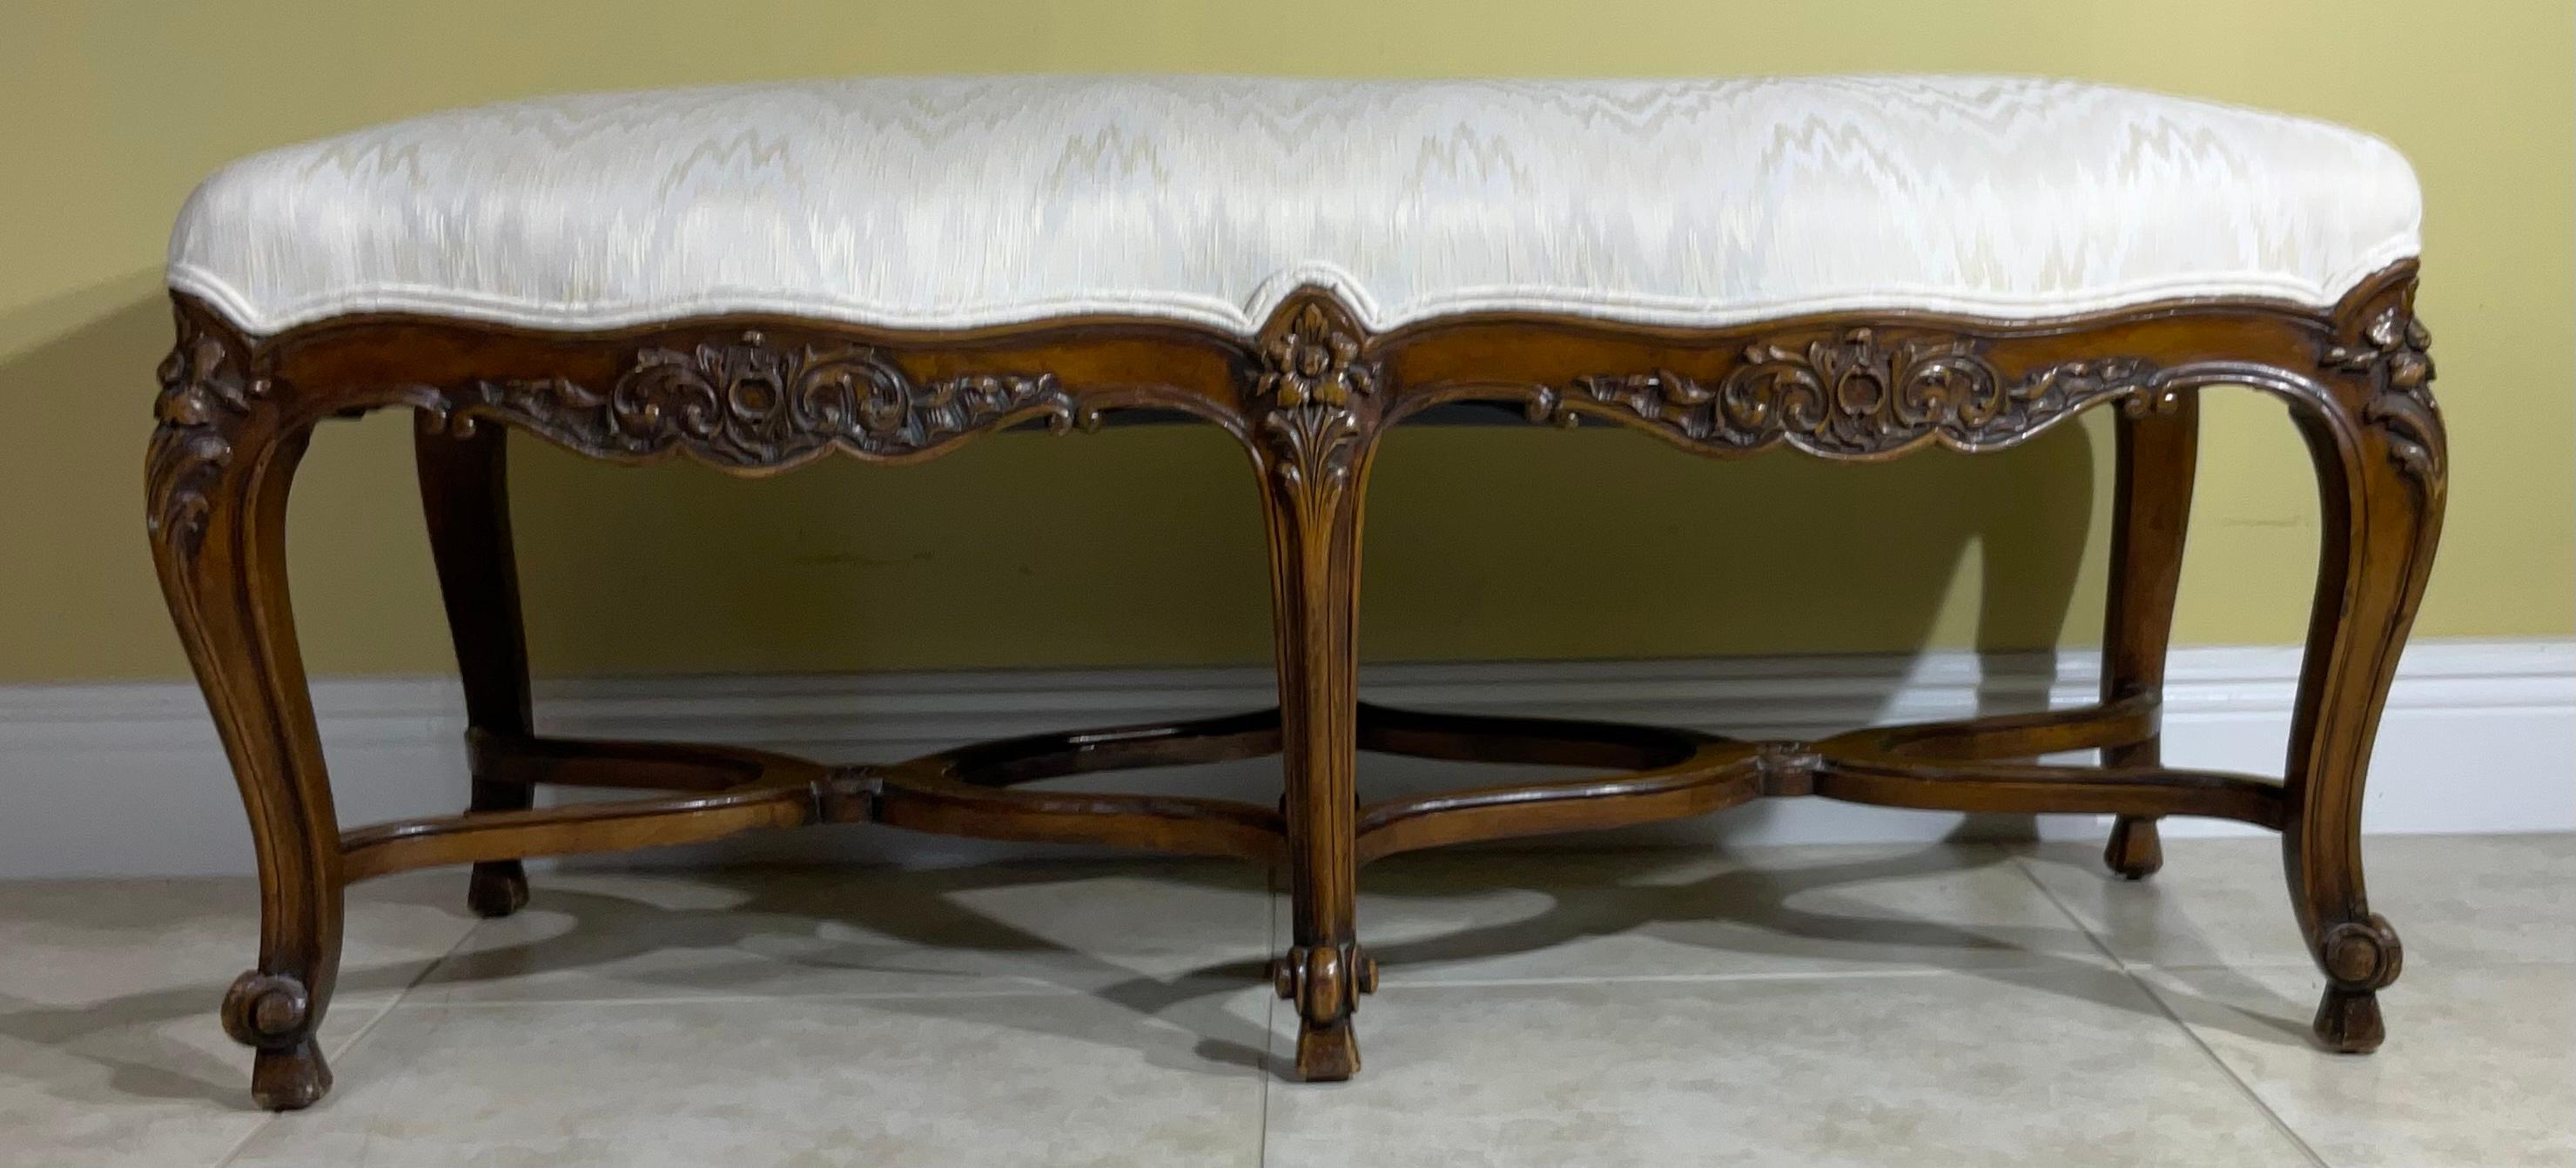 Hand-Carved Louis XV Style, Giltwood Long Bench For Sale